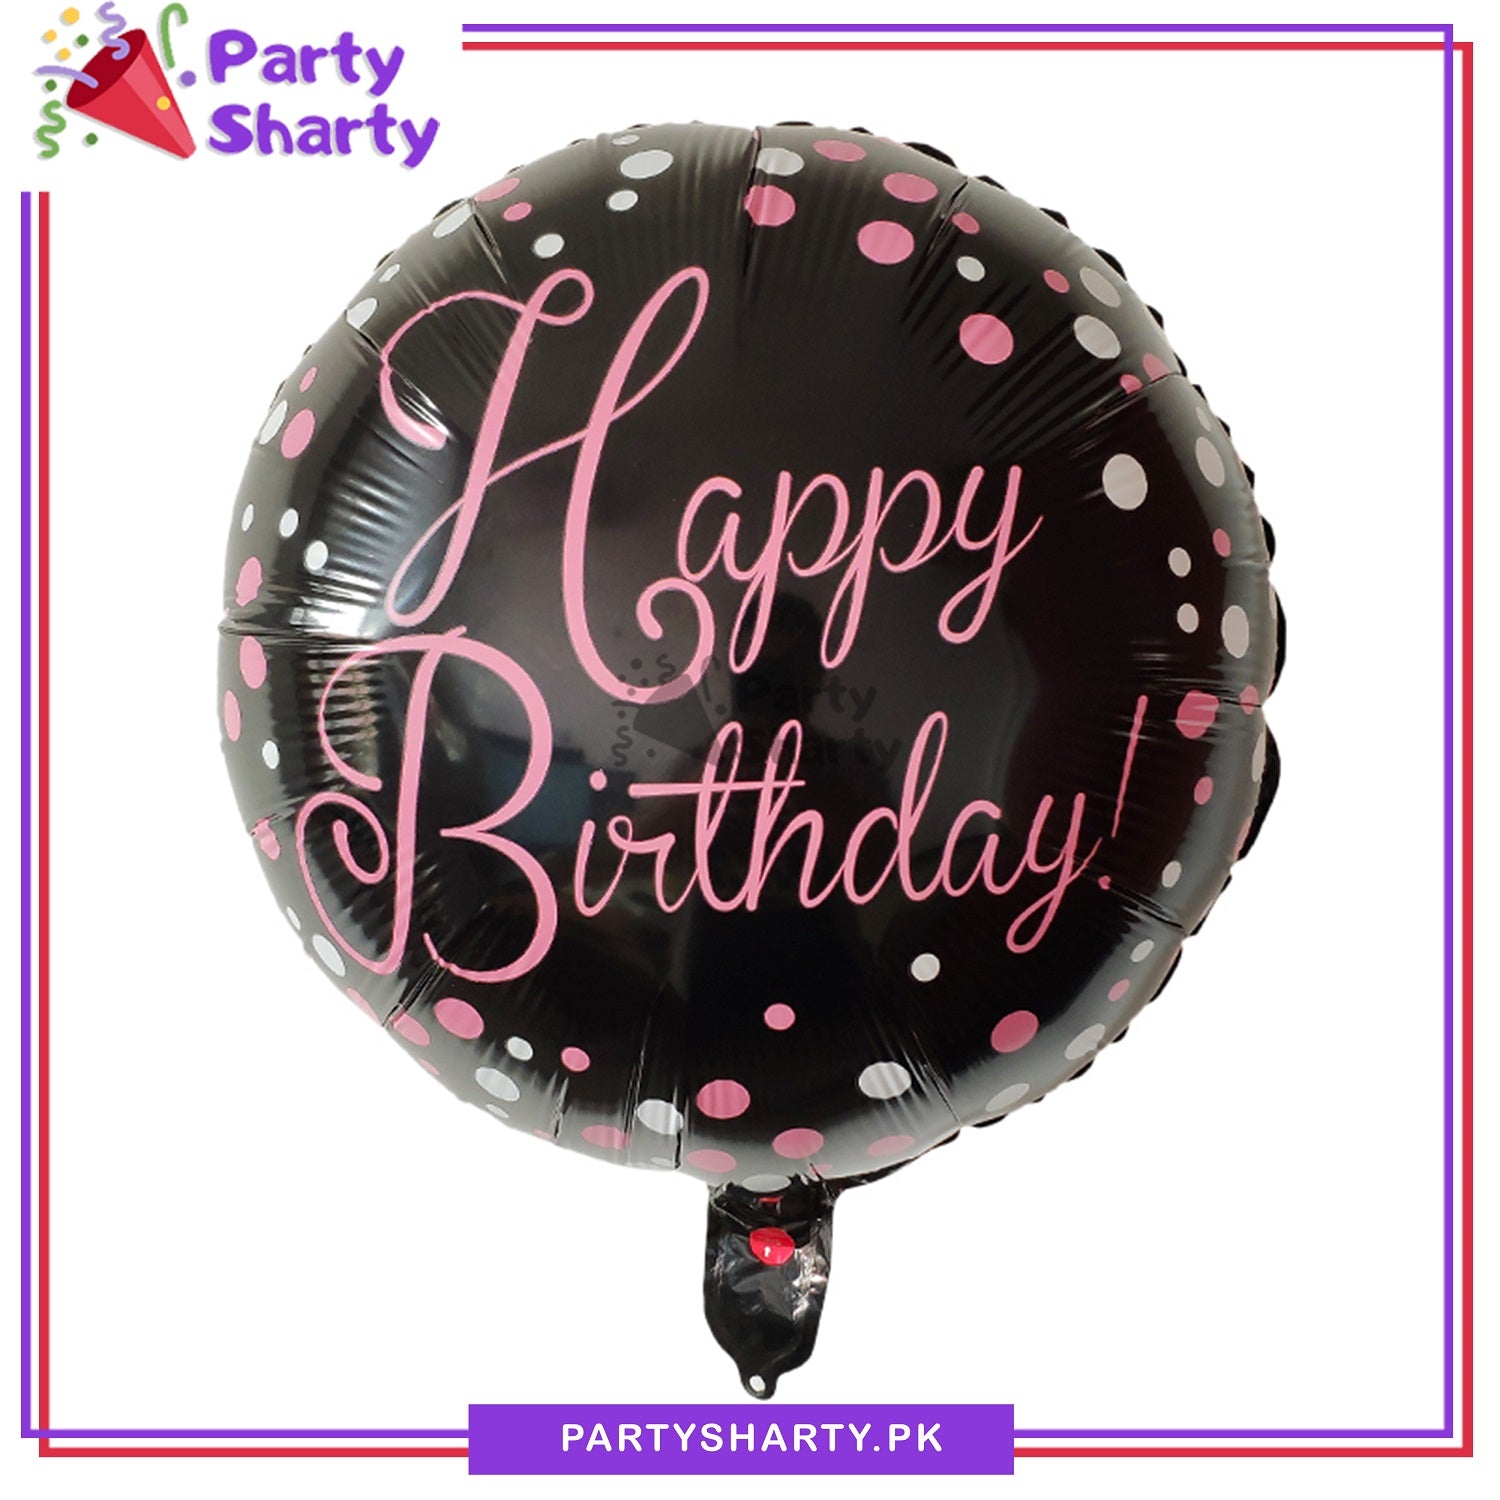 18inch Polka Dots Design Happy Birthday Round Shaped Foil Balloon For Birthday Party Decoration and Celebration